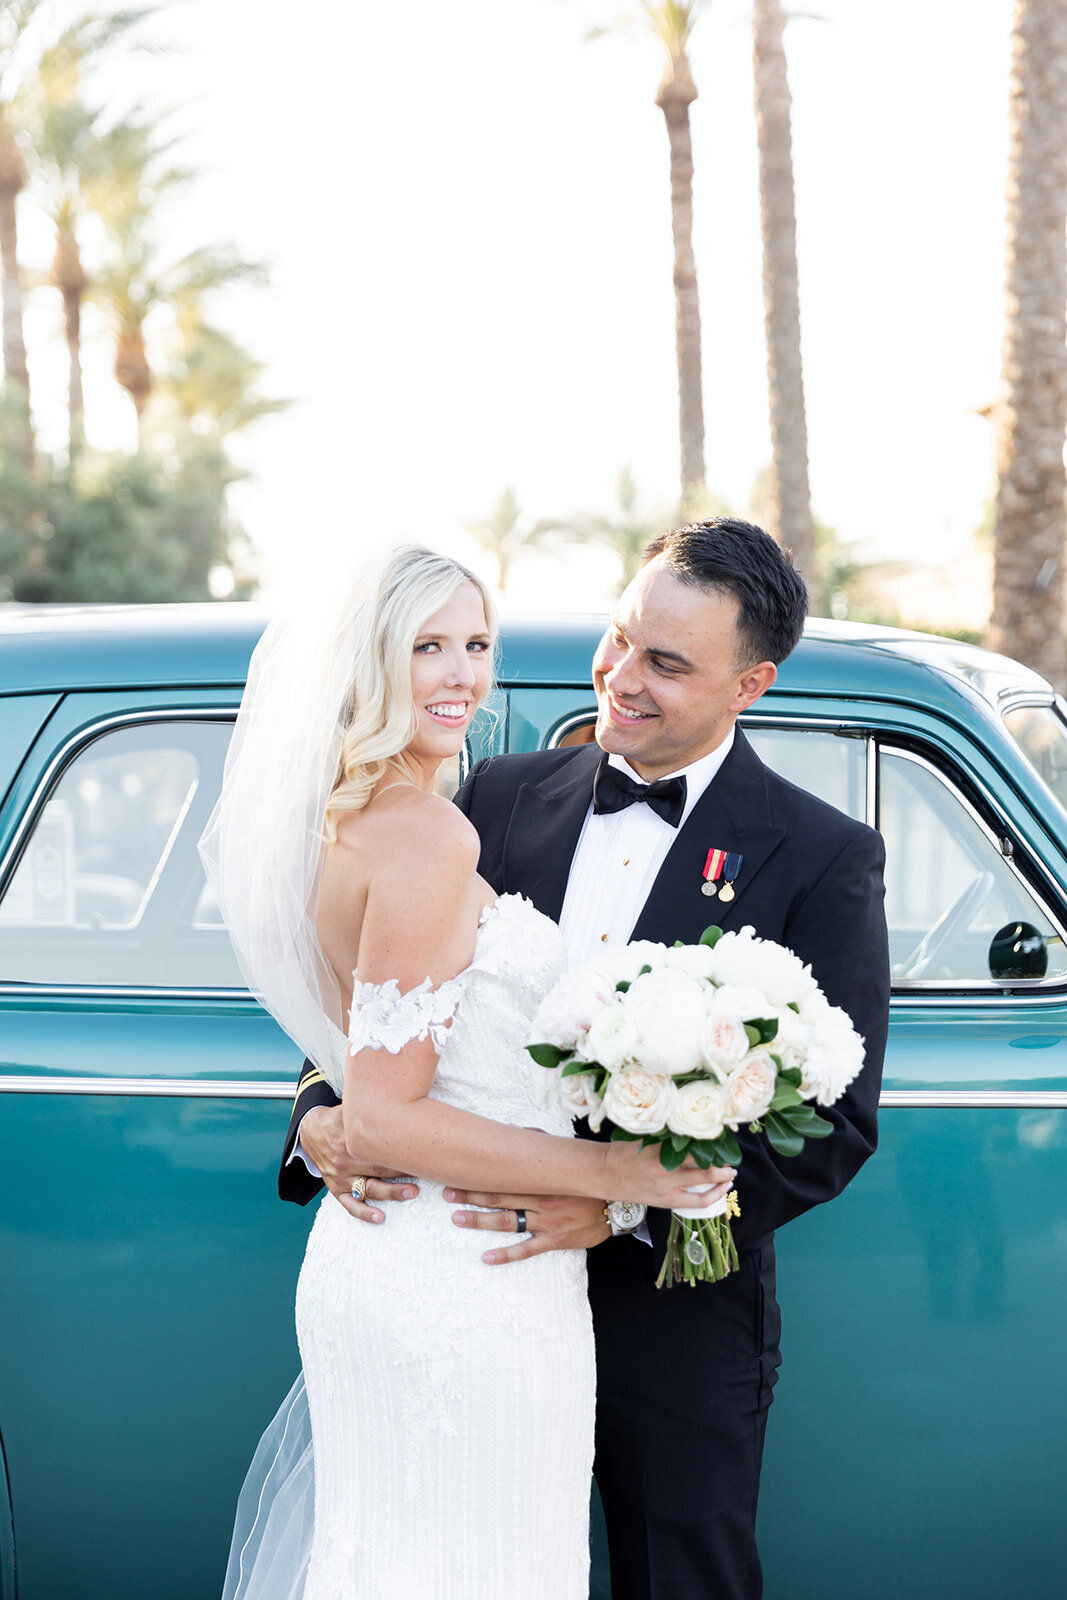 Karlie Colleen Photography - Holly & Ronnie Wedding - Seville Country Club - Gilbert Arizona-704